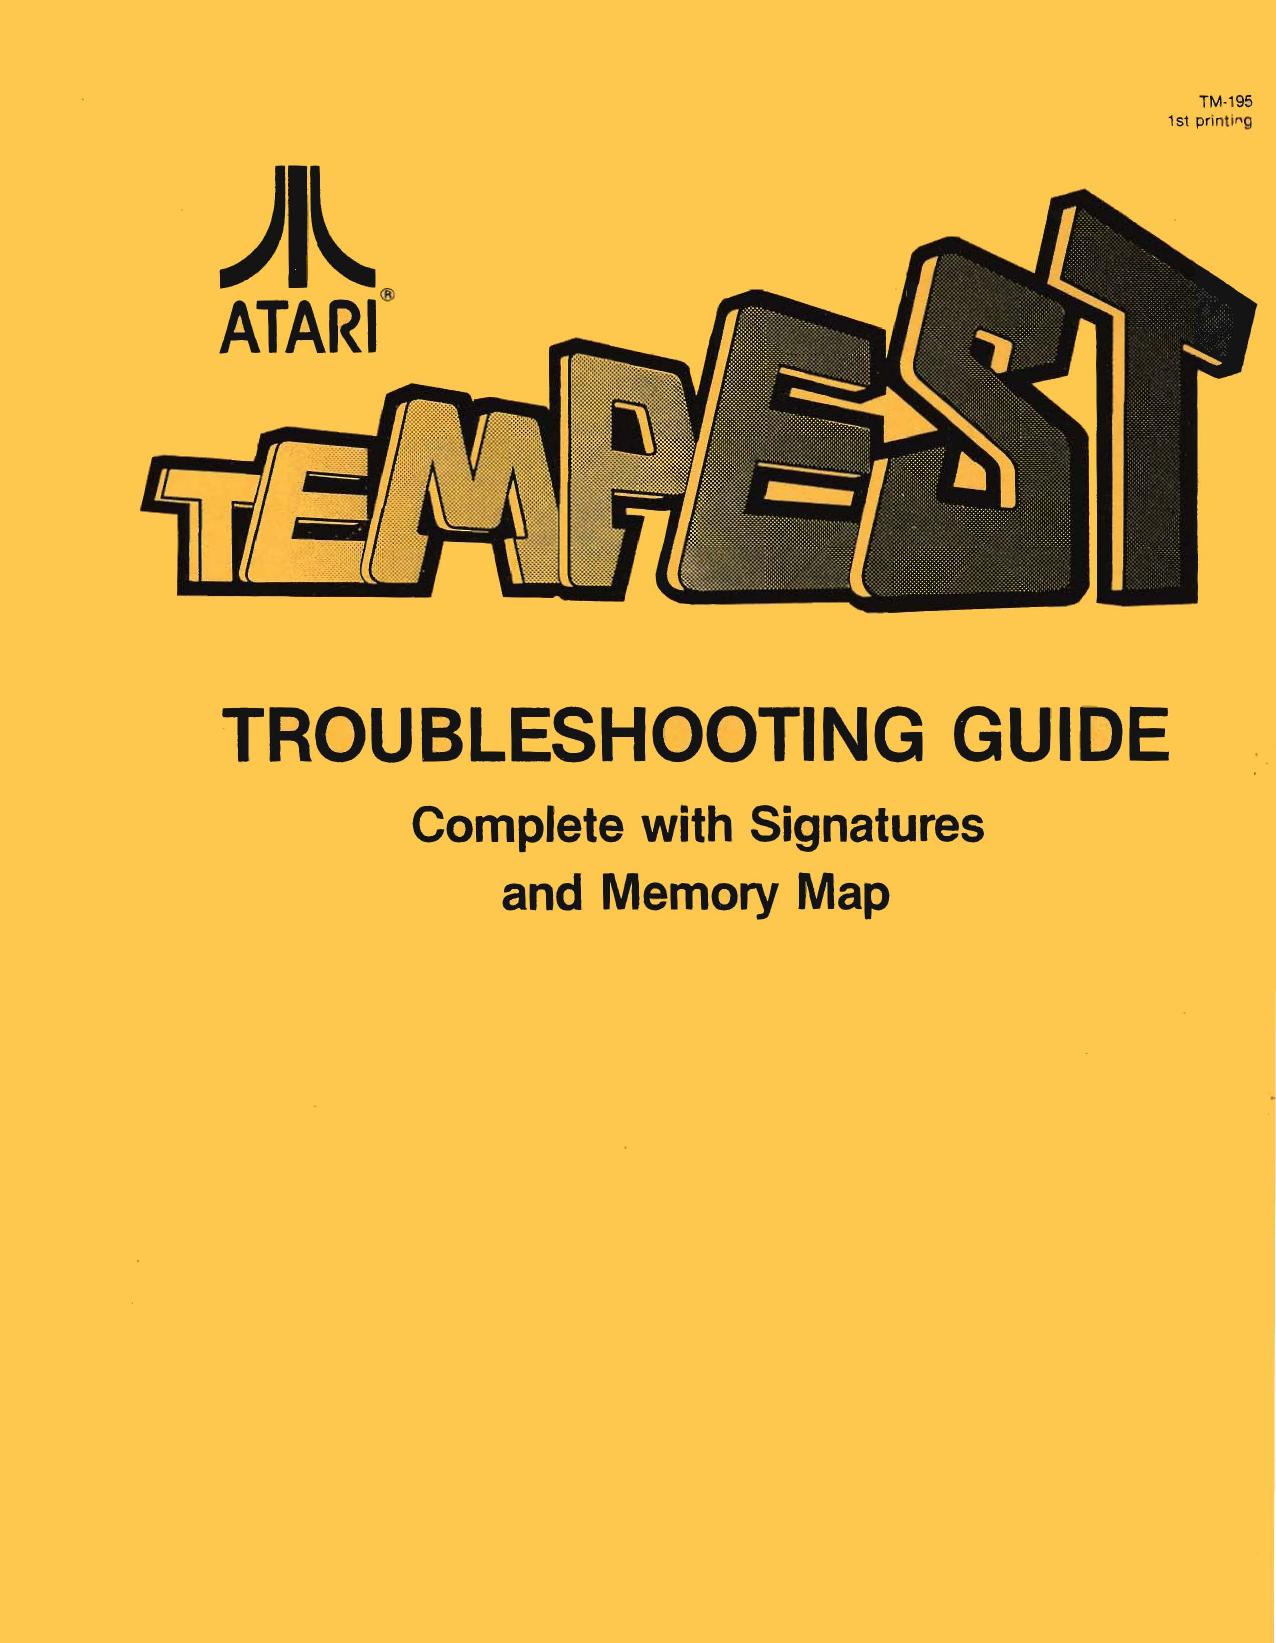 Tempest Troubleshooting Guide TM-195 1st Printing